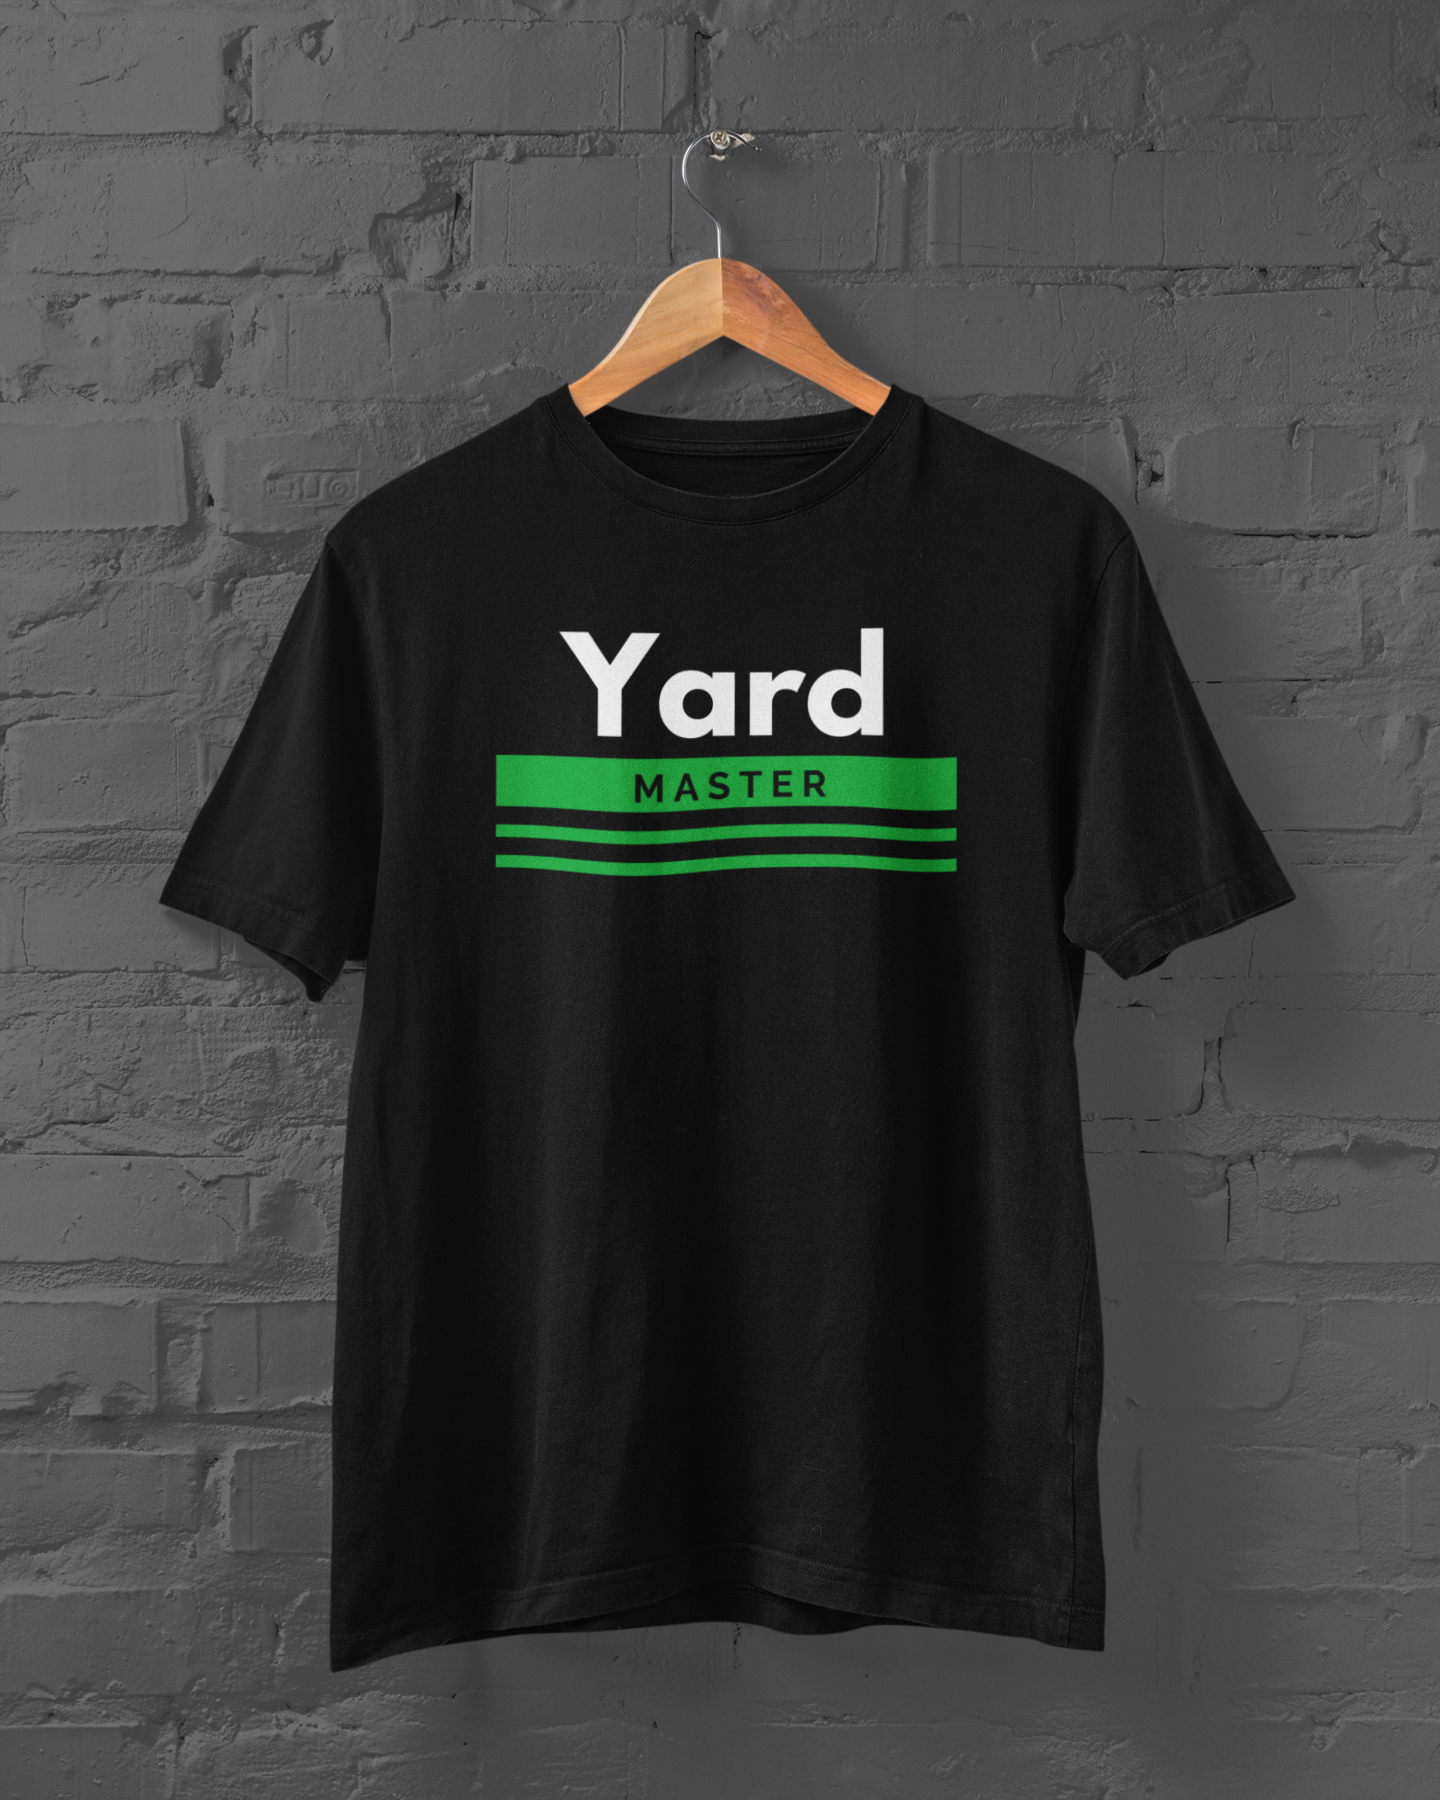 No matter if you're a yard master or a lover of yards, this t-shirt is for you. It's super soft and comfortable, perfect for any occasion!